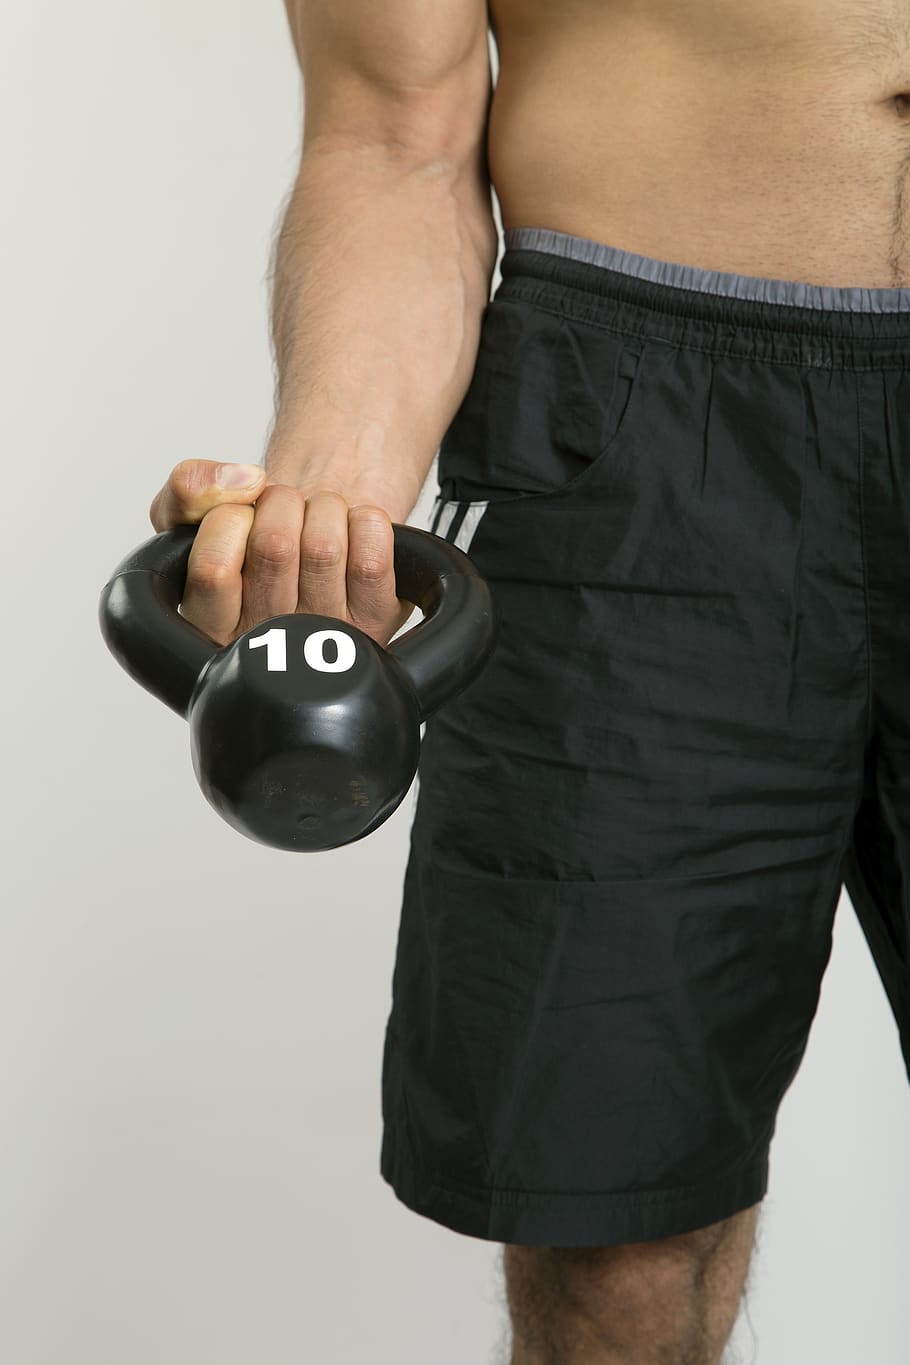 kettlebell, arm, strong arm, one person, midsection, human body part, hand, studio shot, human hand, standing